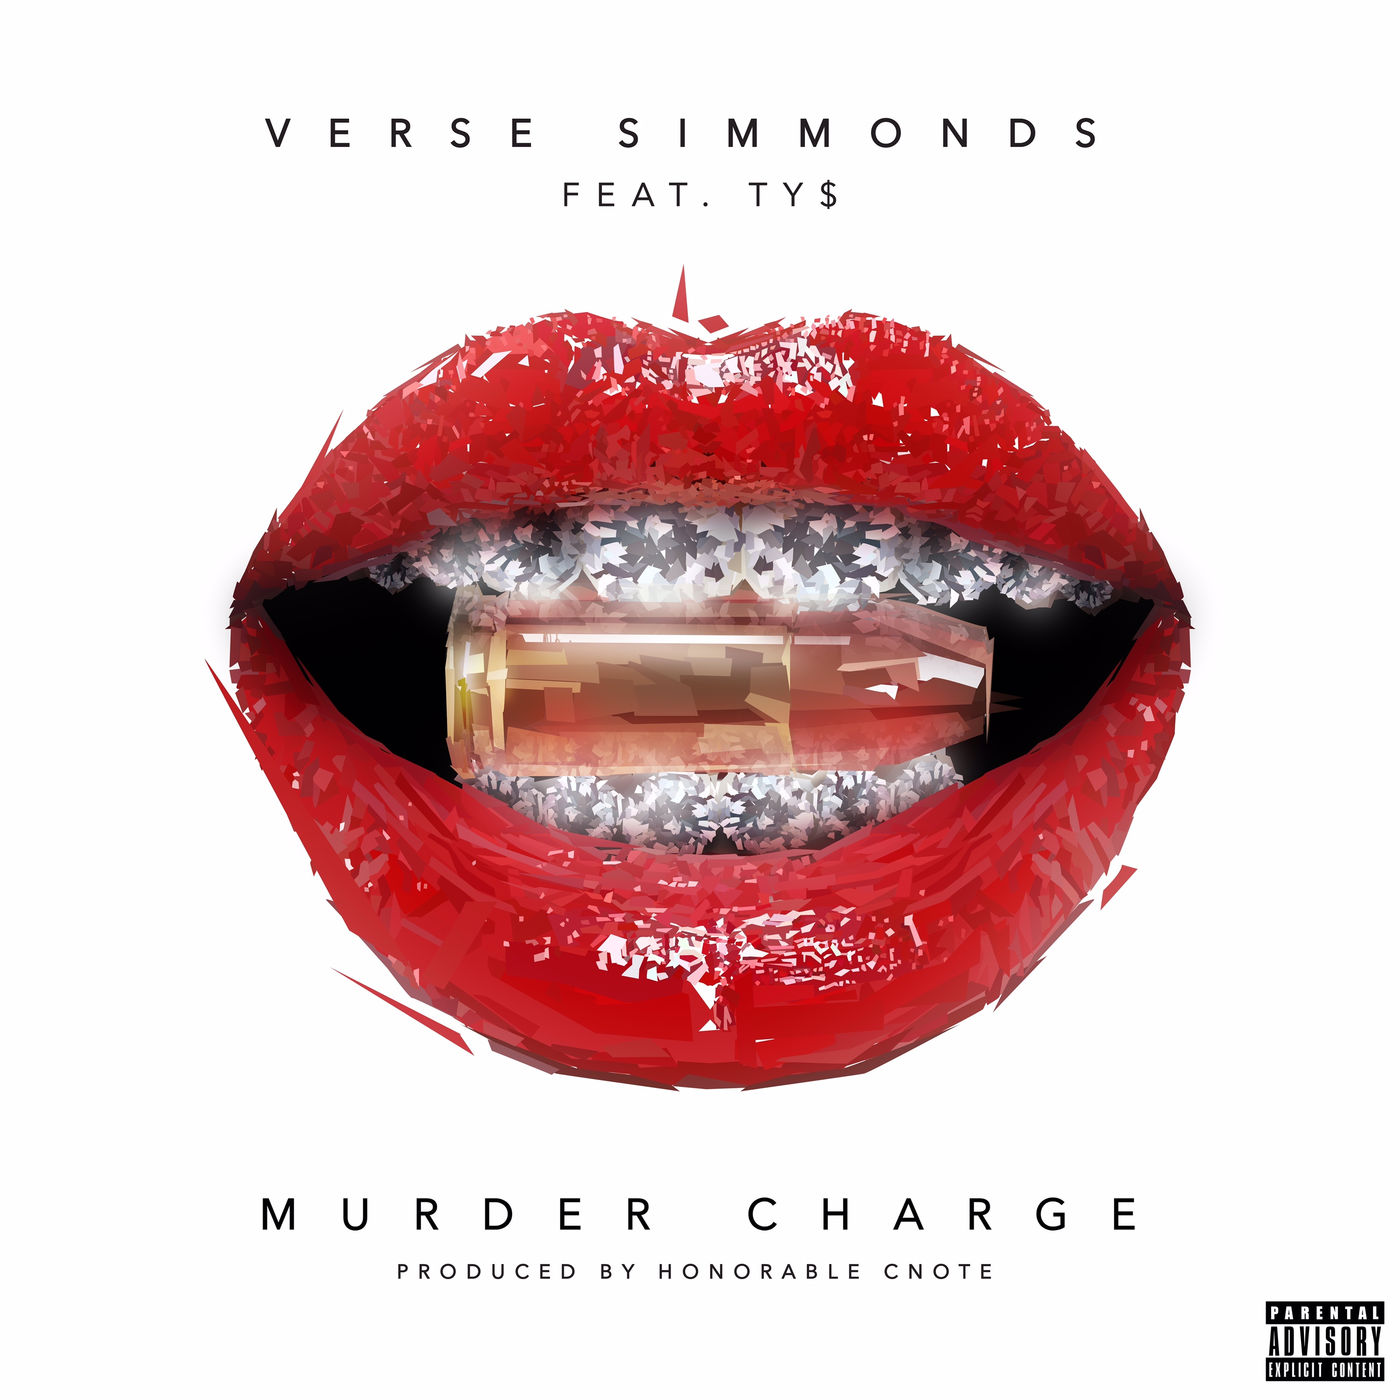 New Music: Verse Simmonds – “Murder Charge” Feat. Ty Dolla $ign [LISTEN]